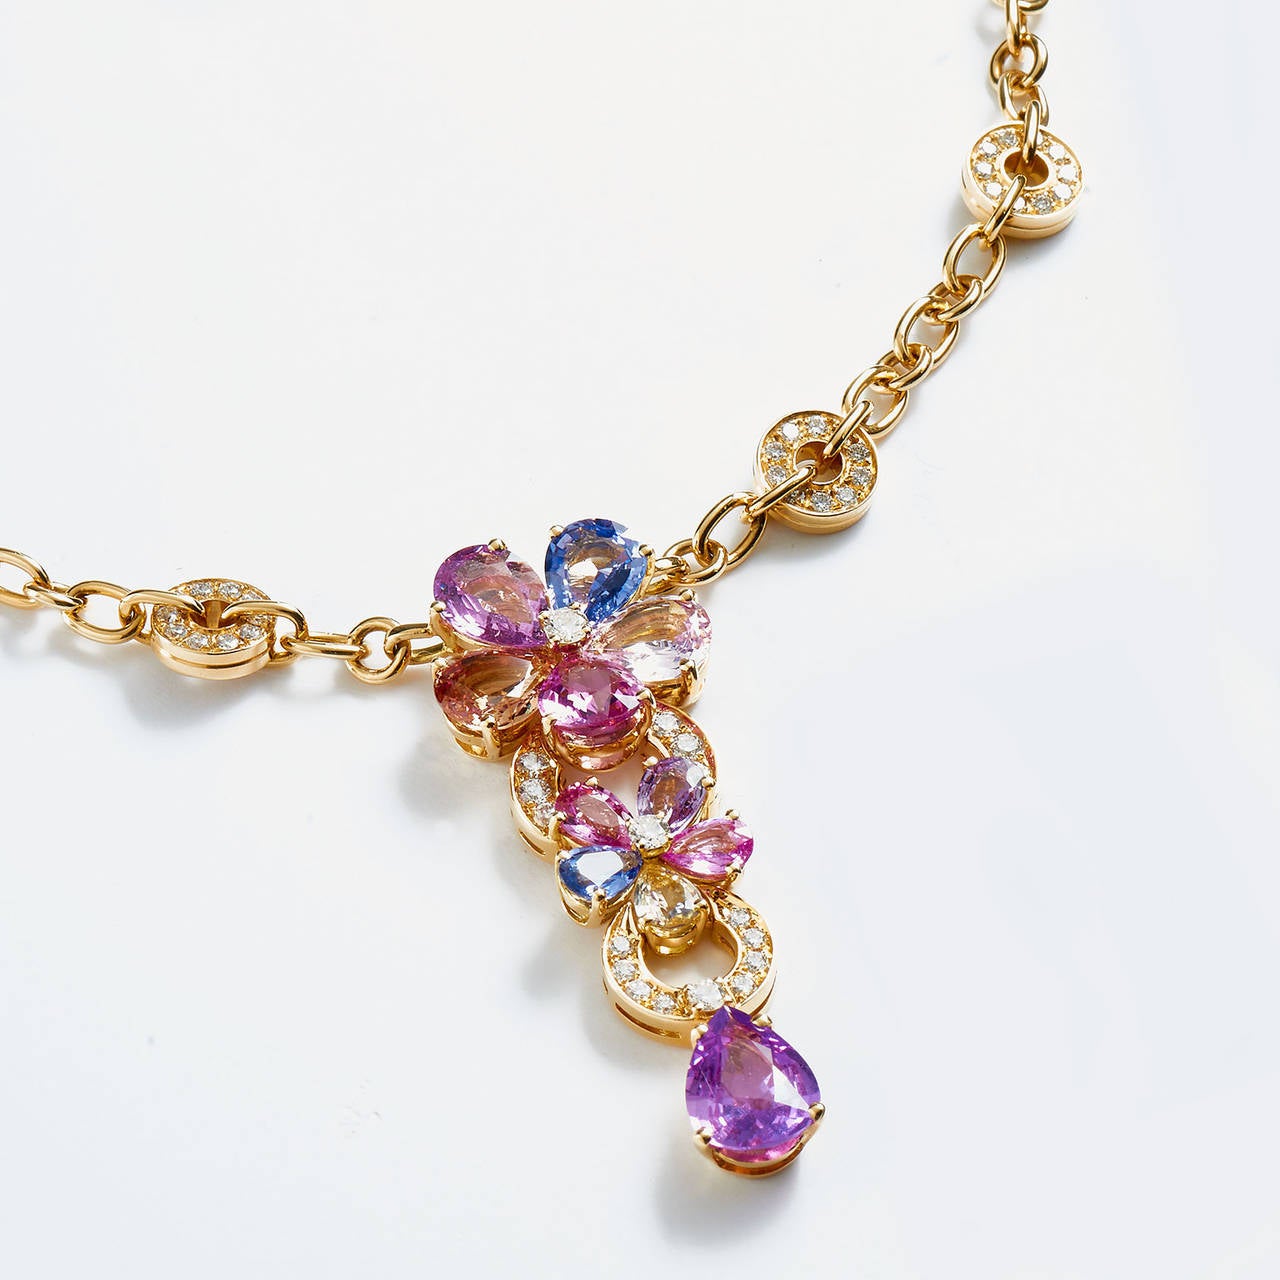 This vibrant 18K yellow gold Bvlgari piece features a rainbow of lavish natural sapphires creating a kaleidoscope of color. Ten multicolor pear shape sapphires form two central flowers that drop from the chain to elegantly lay on the chest with a